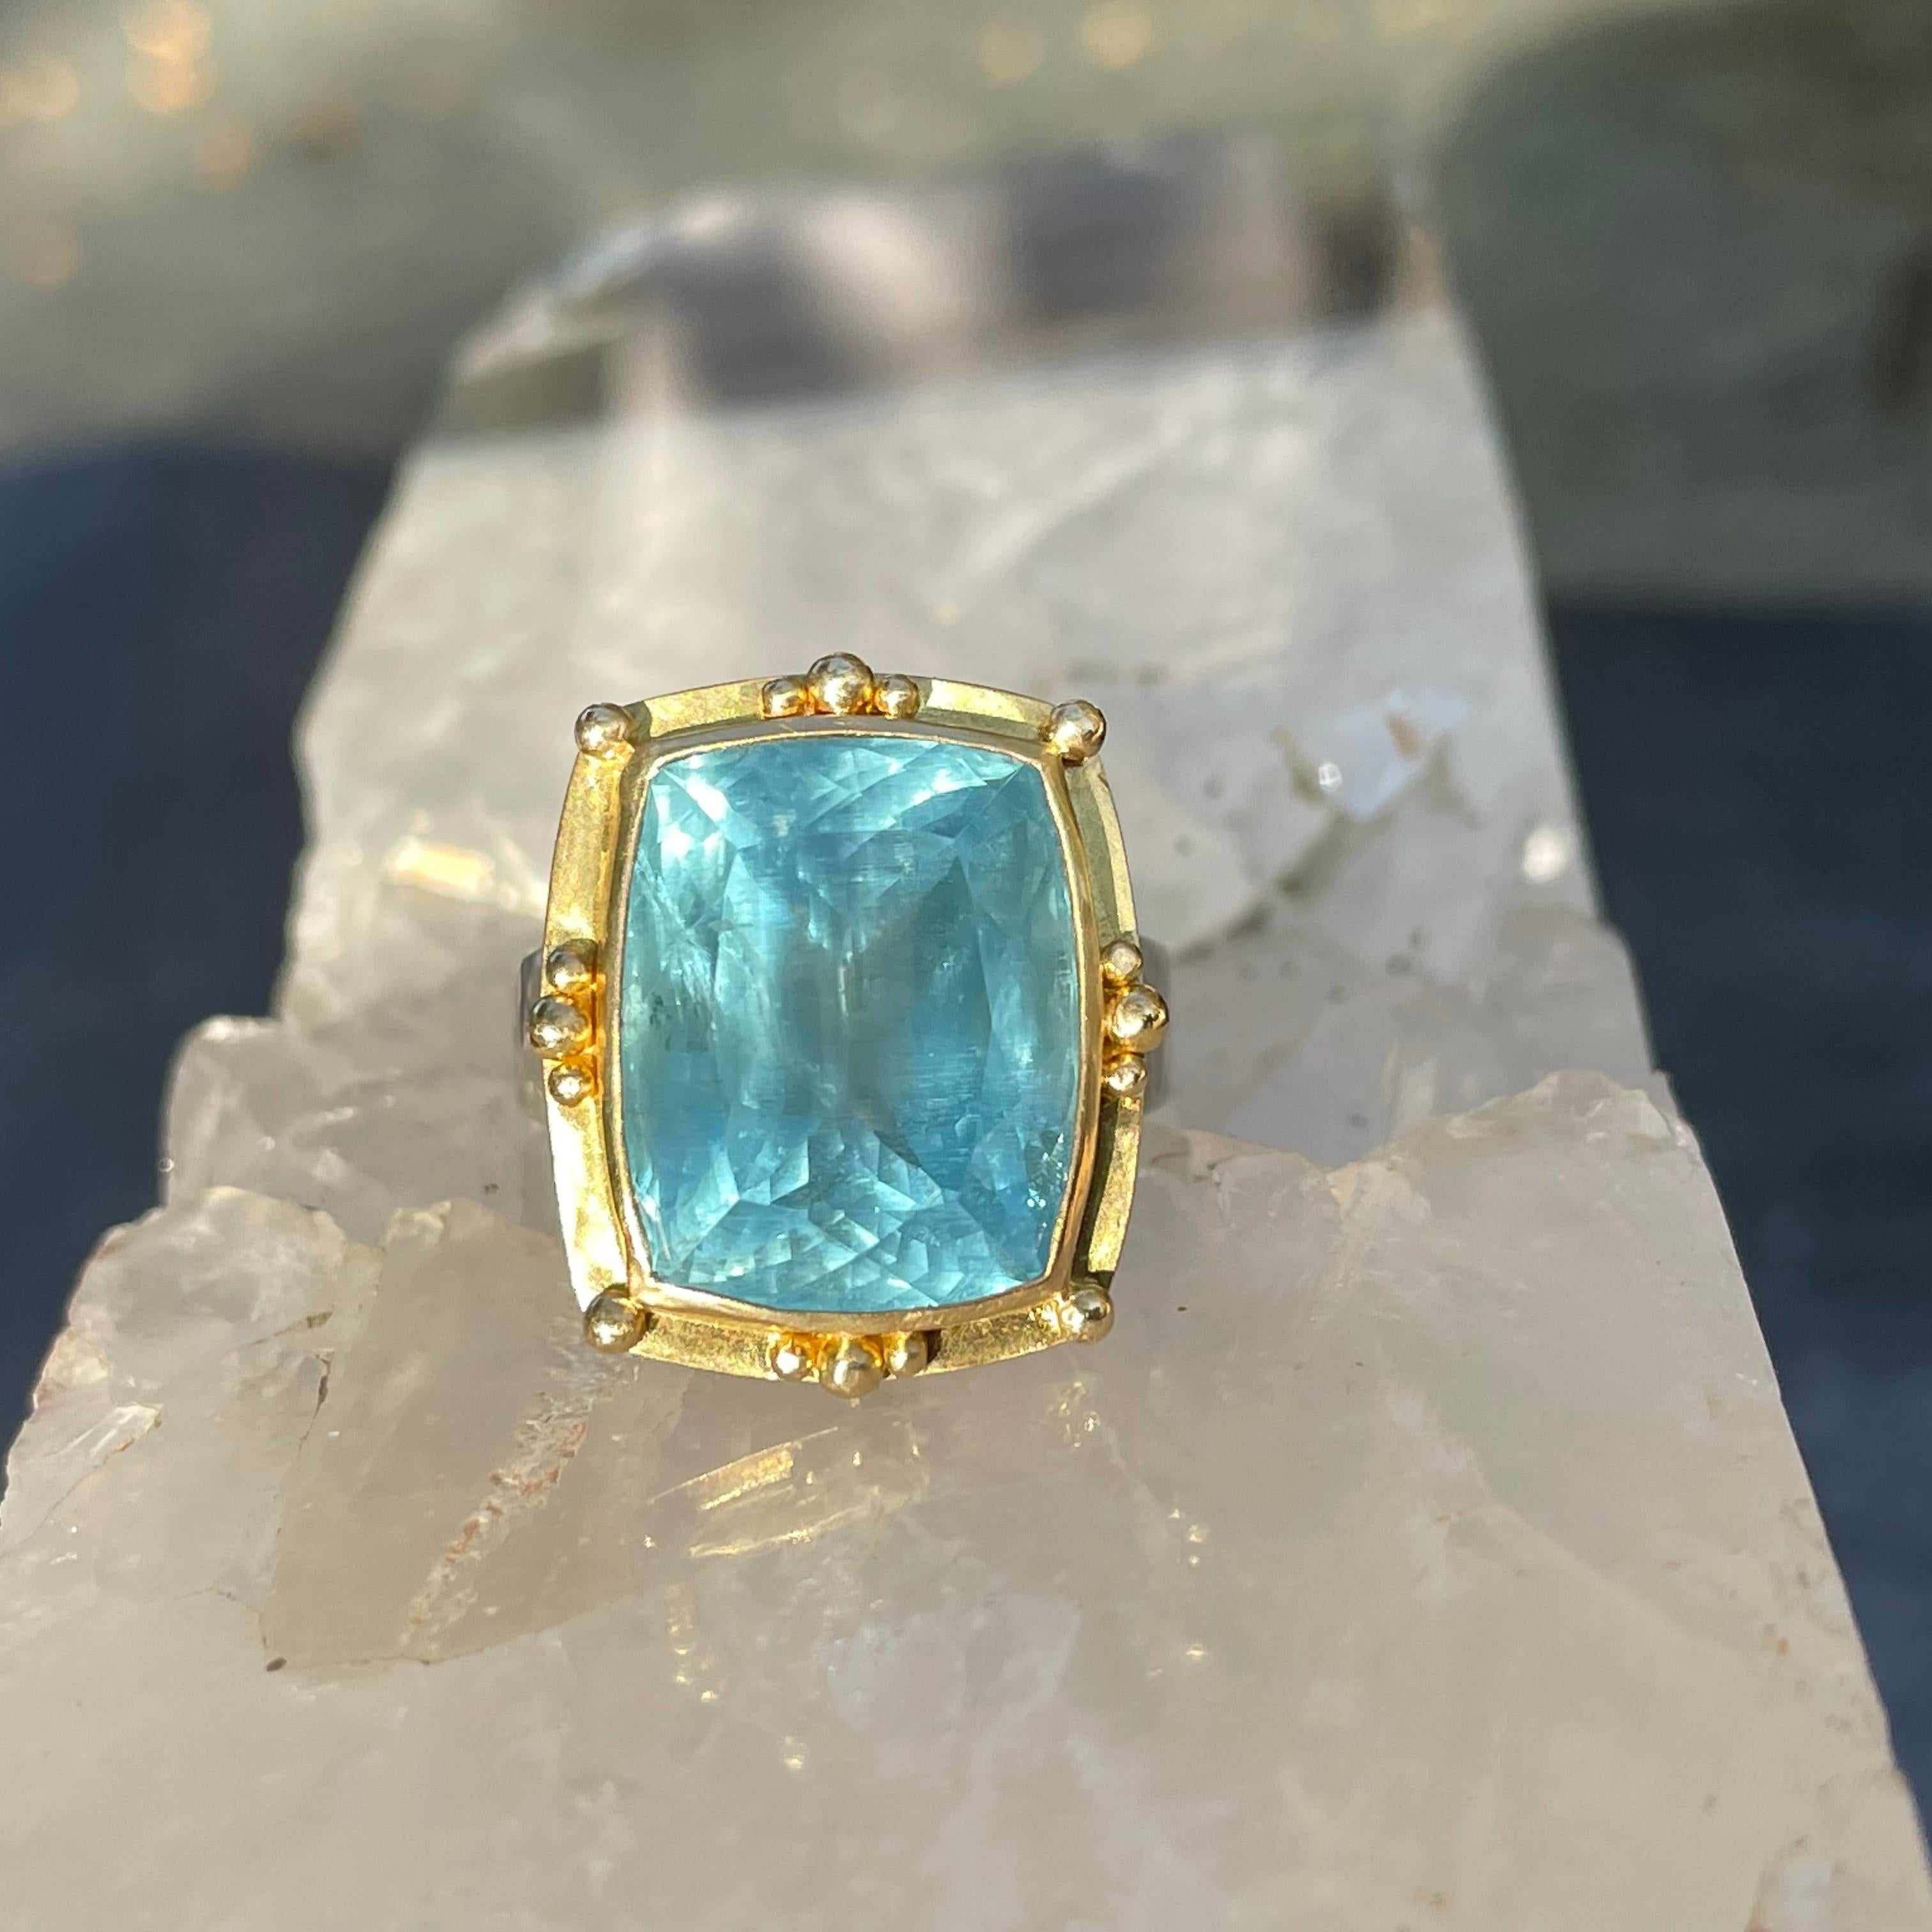 A lively and reflective 13 x 16 mm sightly widened emerald cut aquamarine is set in a medieval-inspired Steven Battelle 